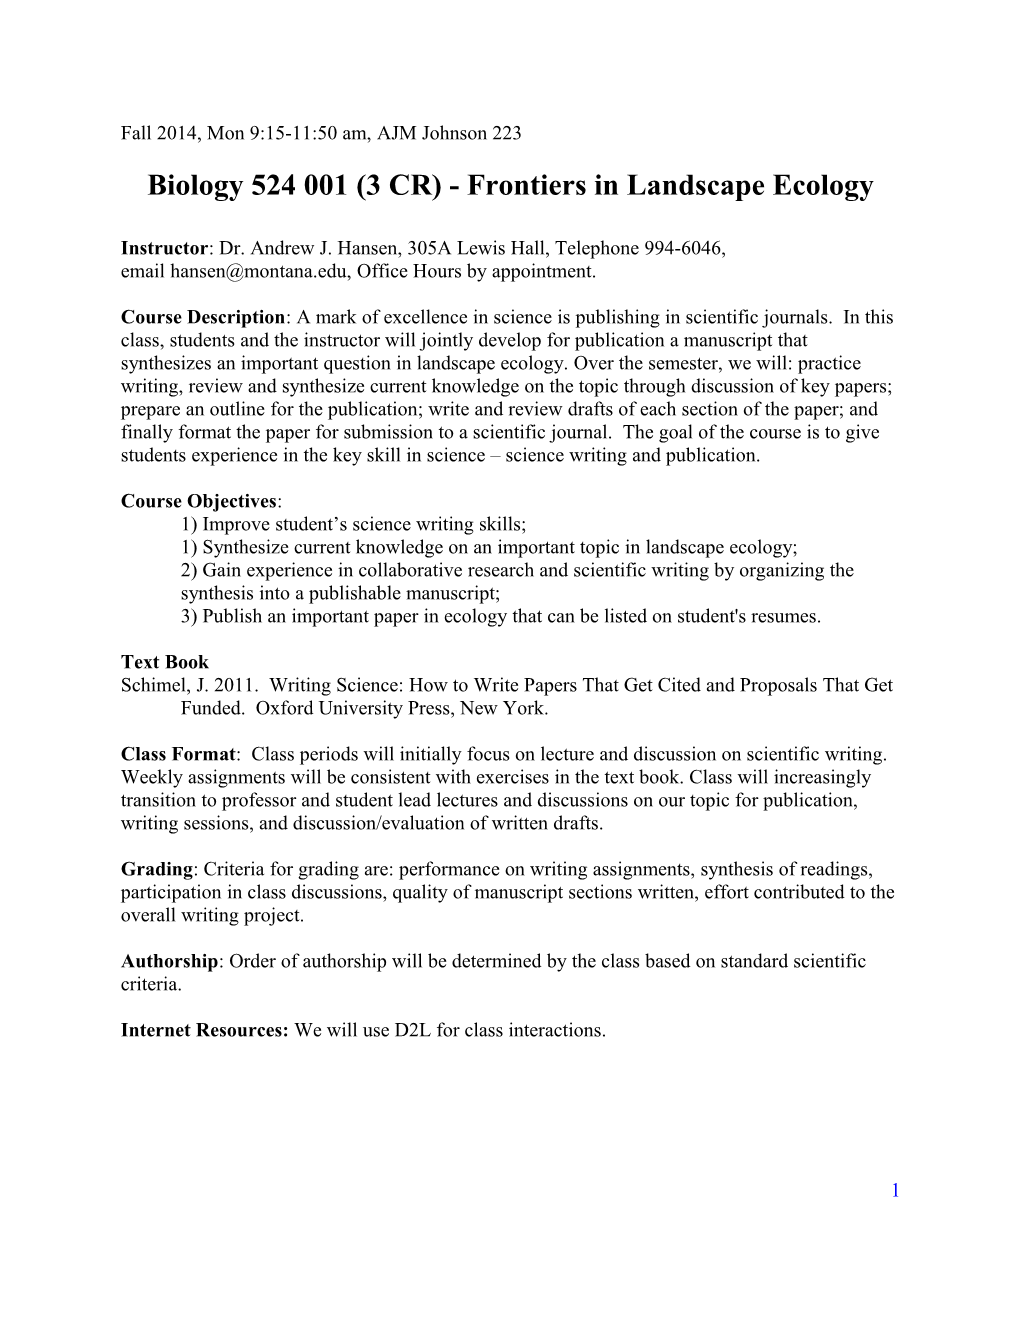 Biology 524 001 (3 CR) - Frontiers in Landscape Ecology